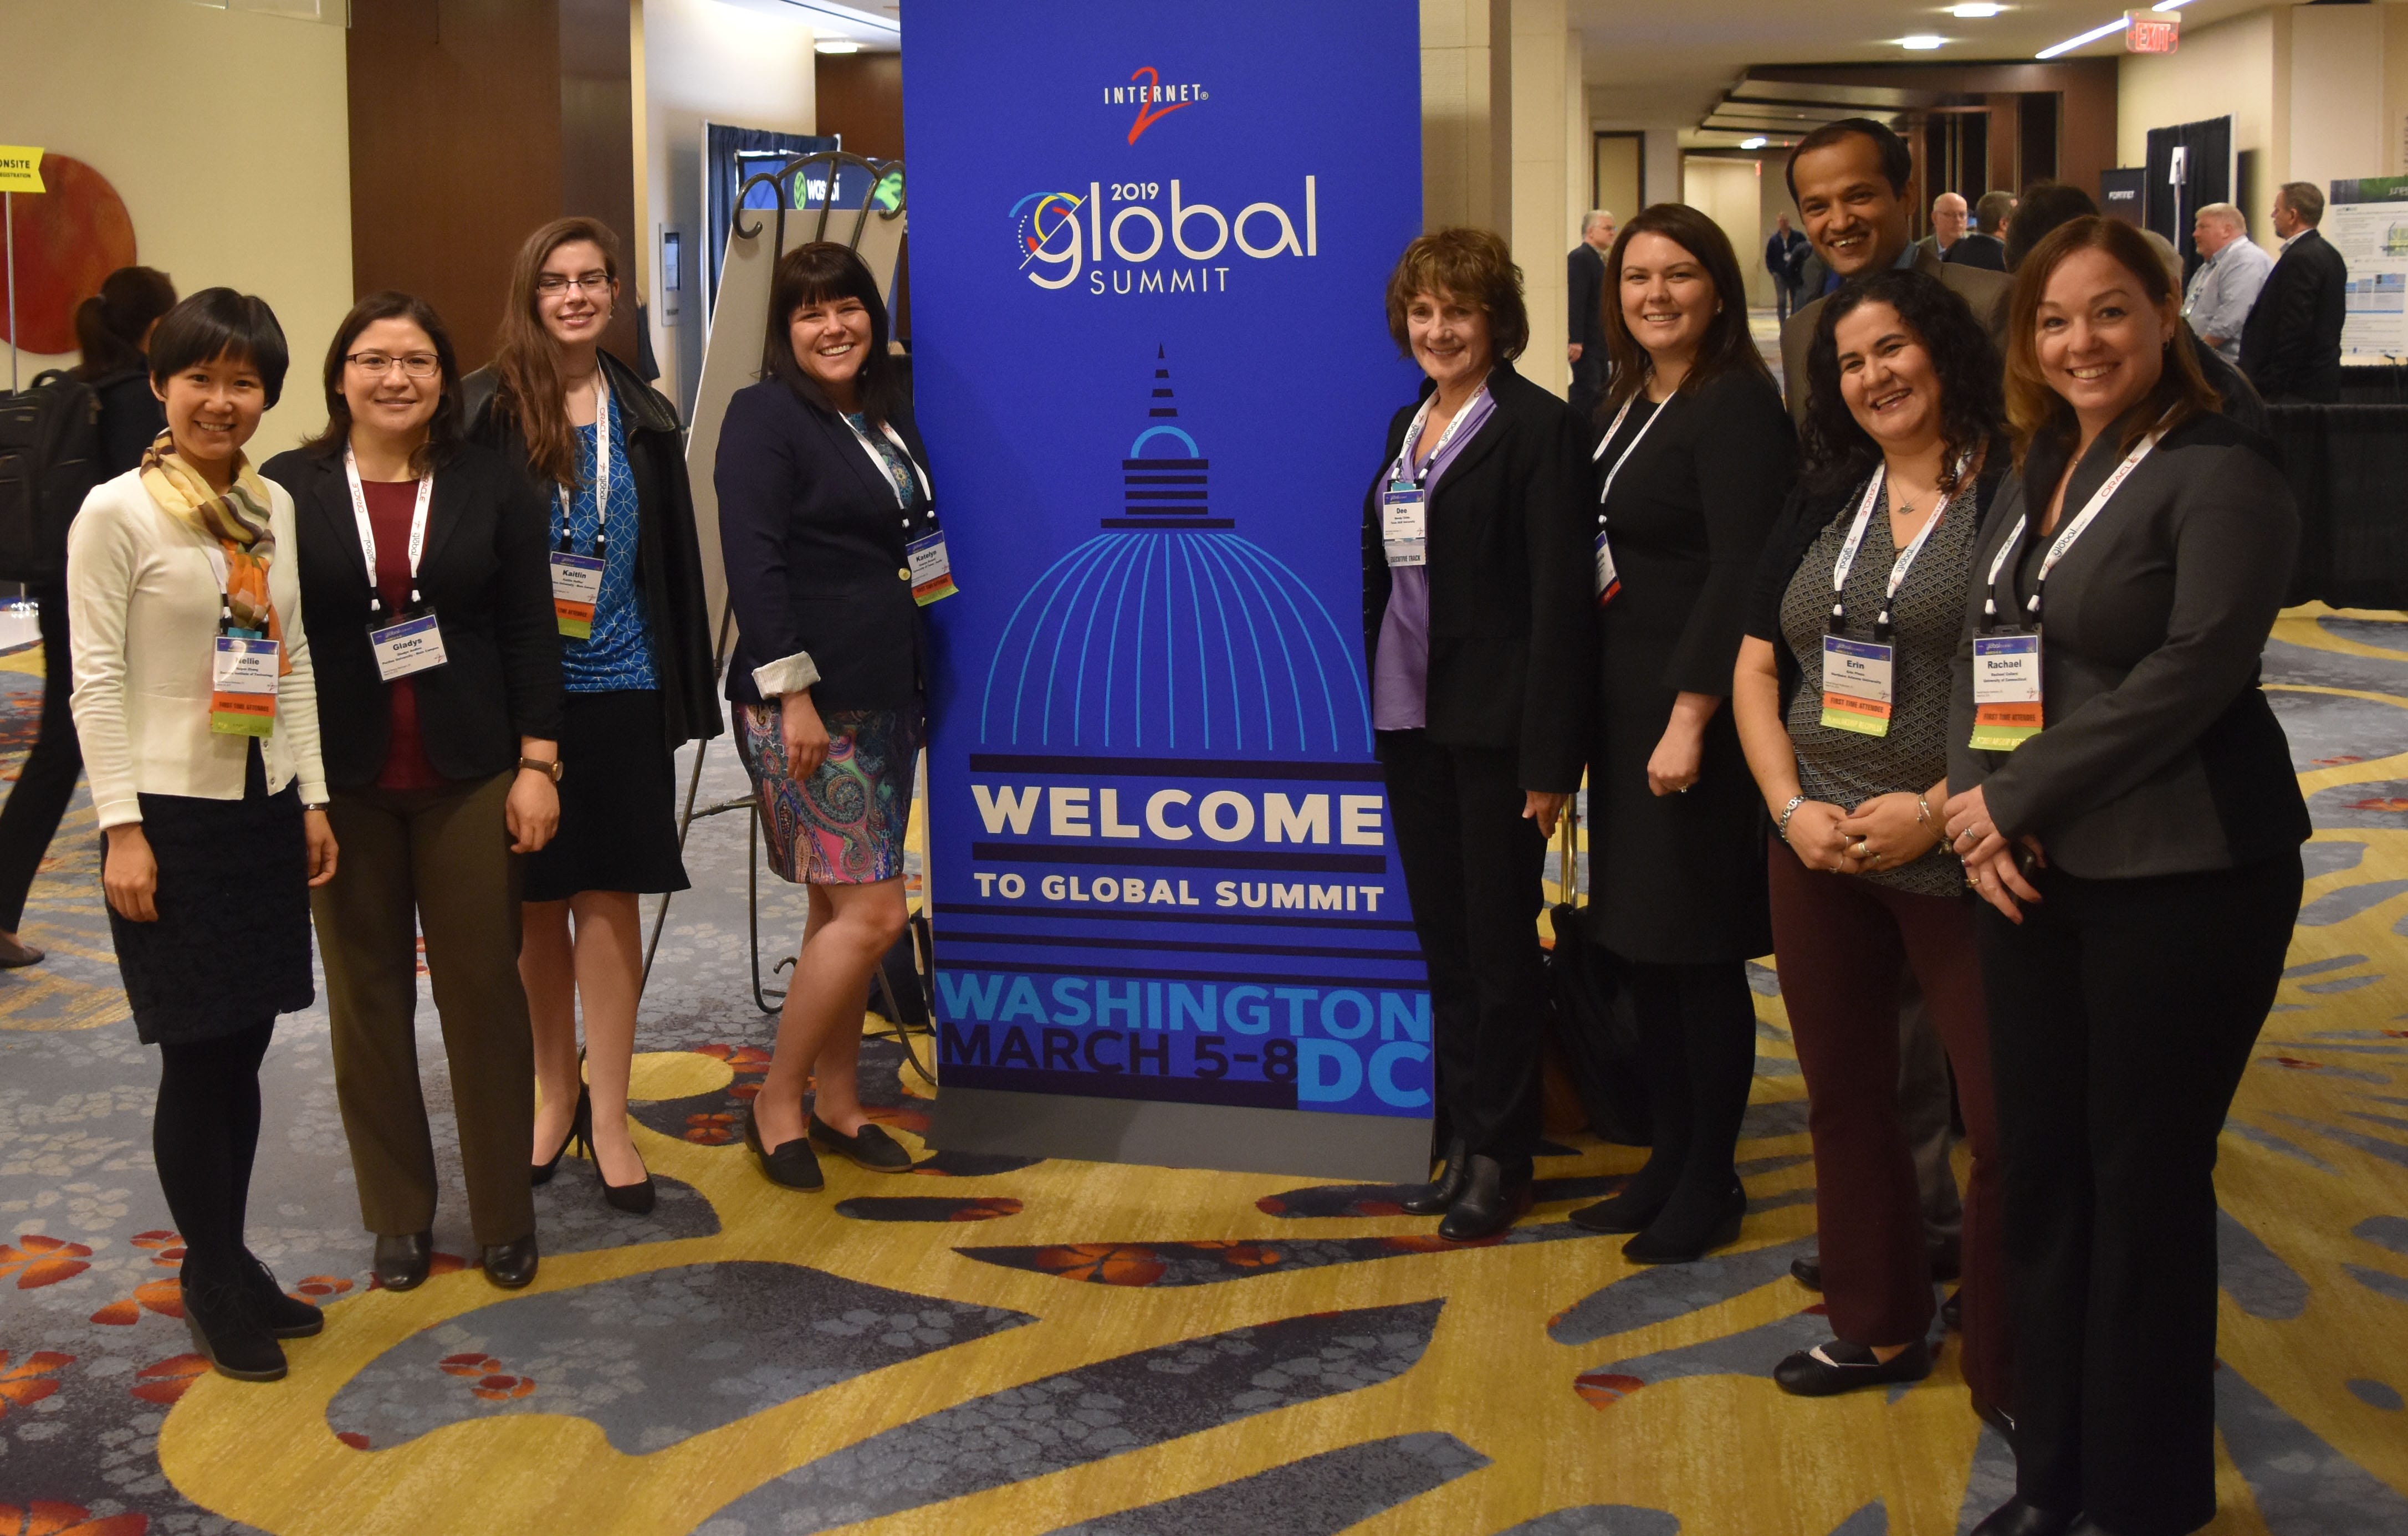 Group of Global Summit attendees smiling